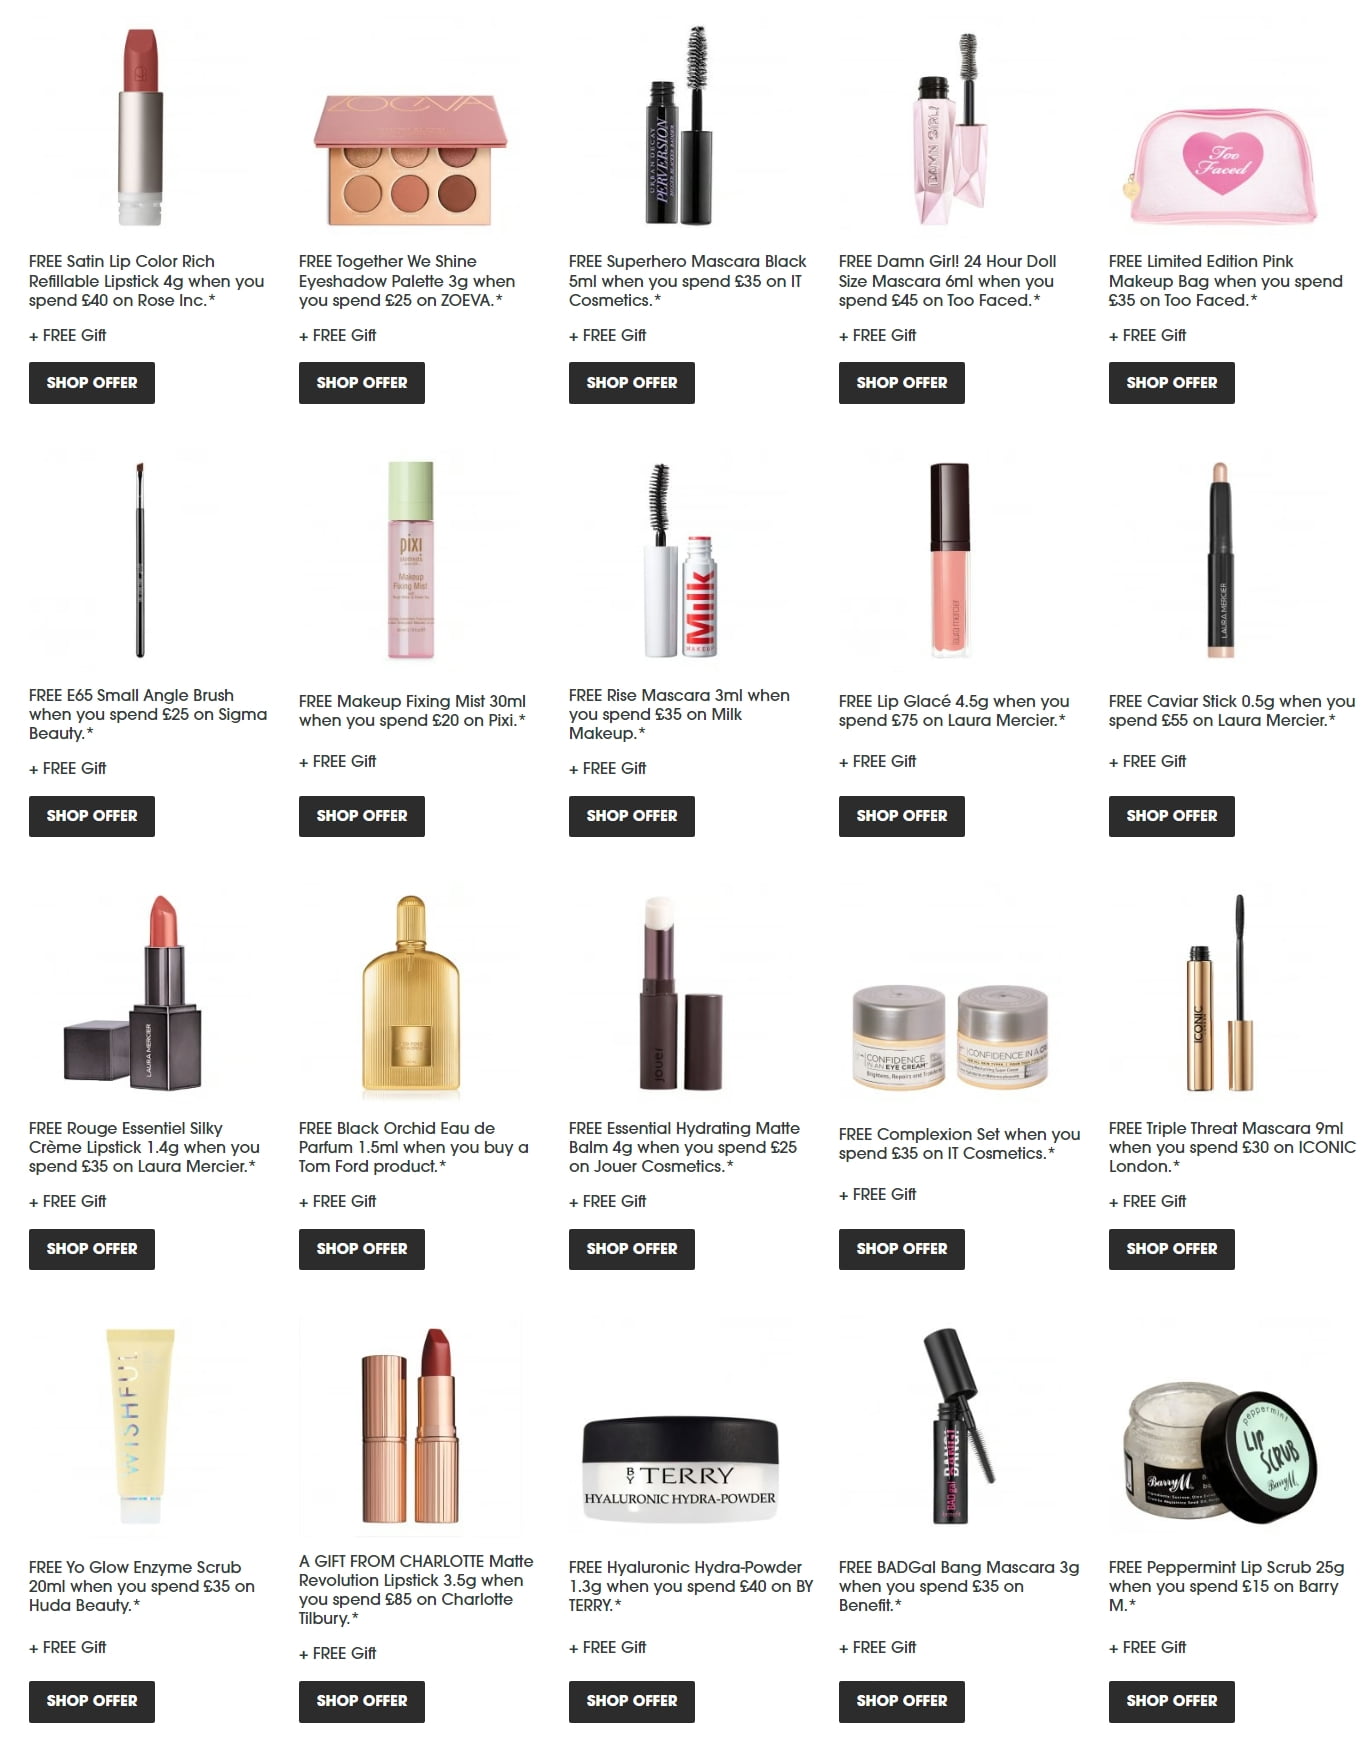 New gift with purchase offers at Sephora UK